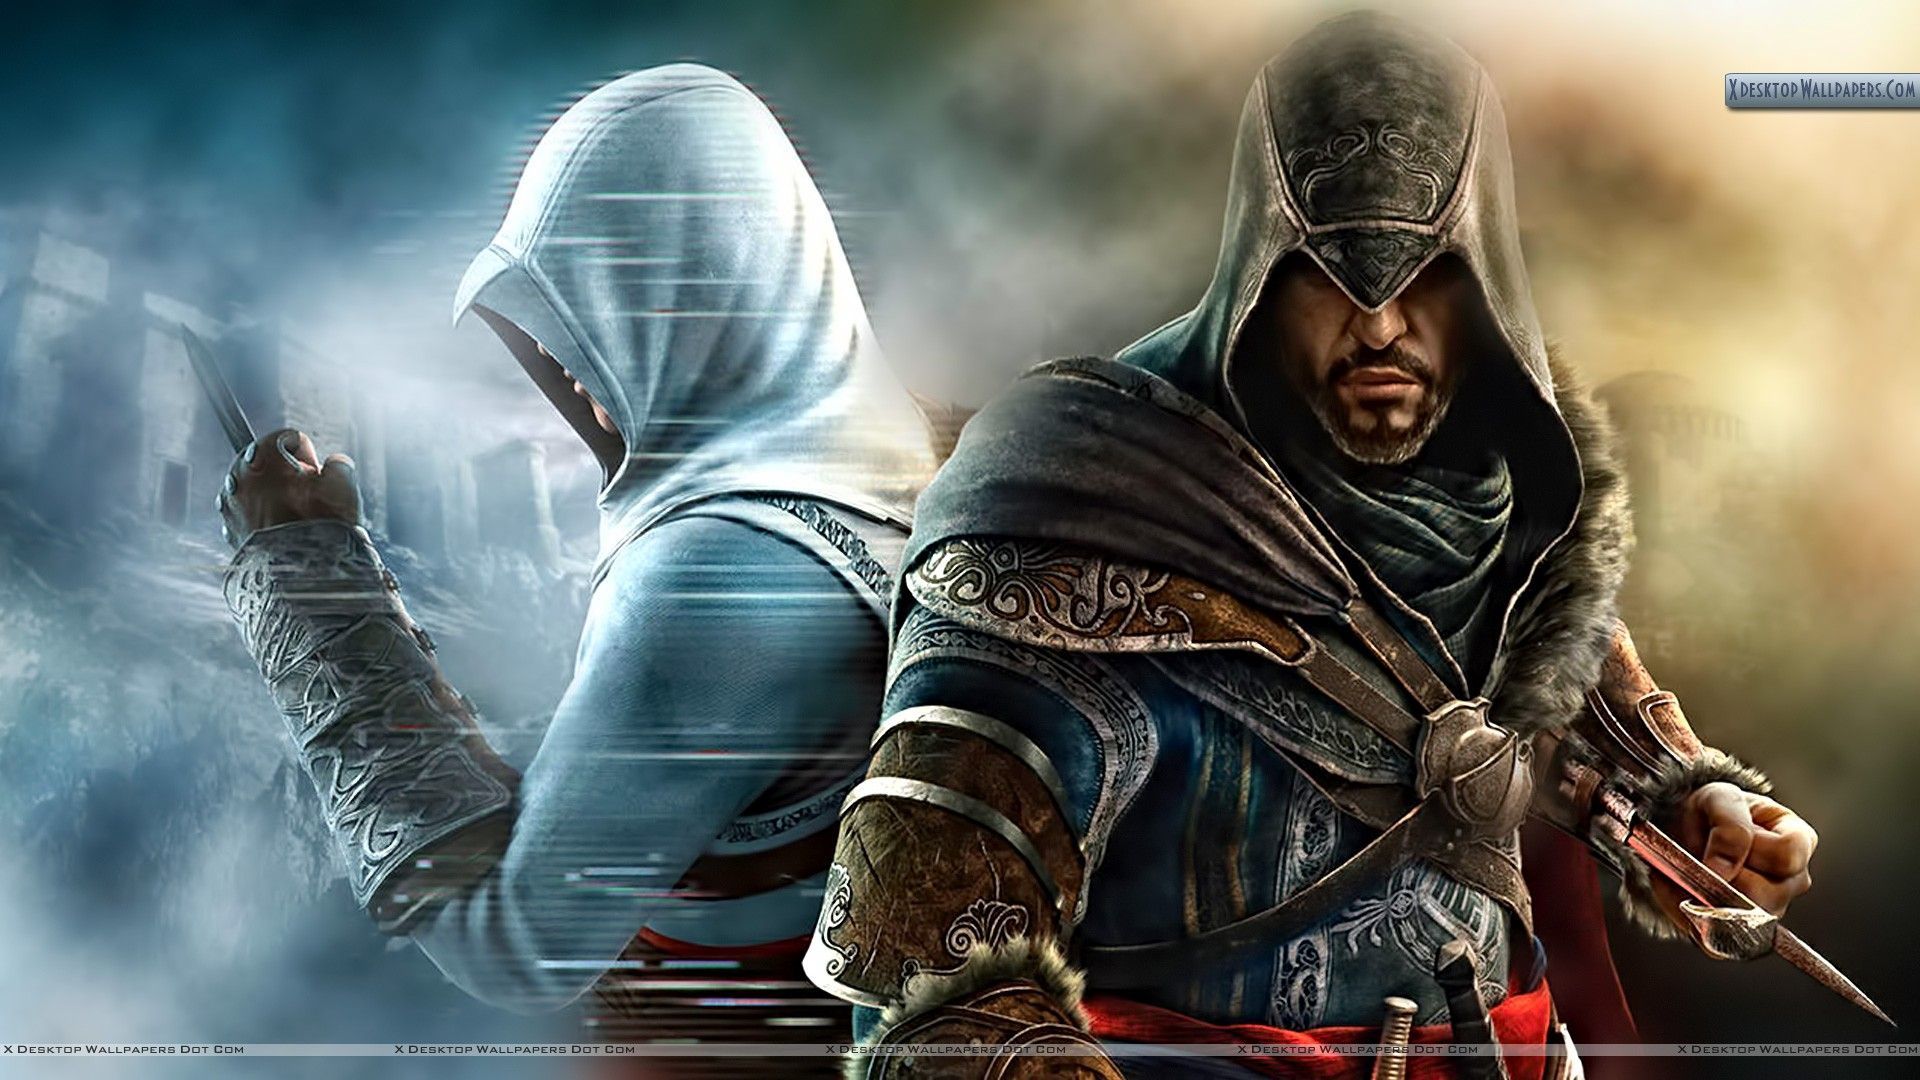 Assassin's Creed: Revelations (Poster). Assassin's creed